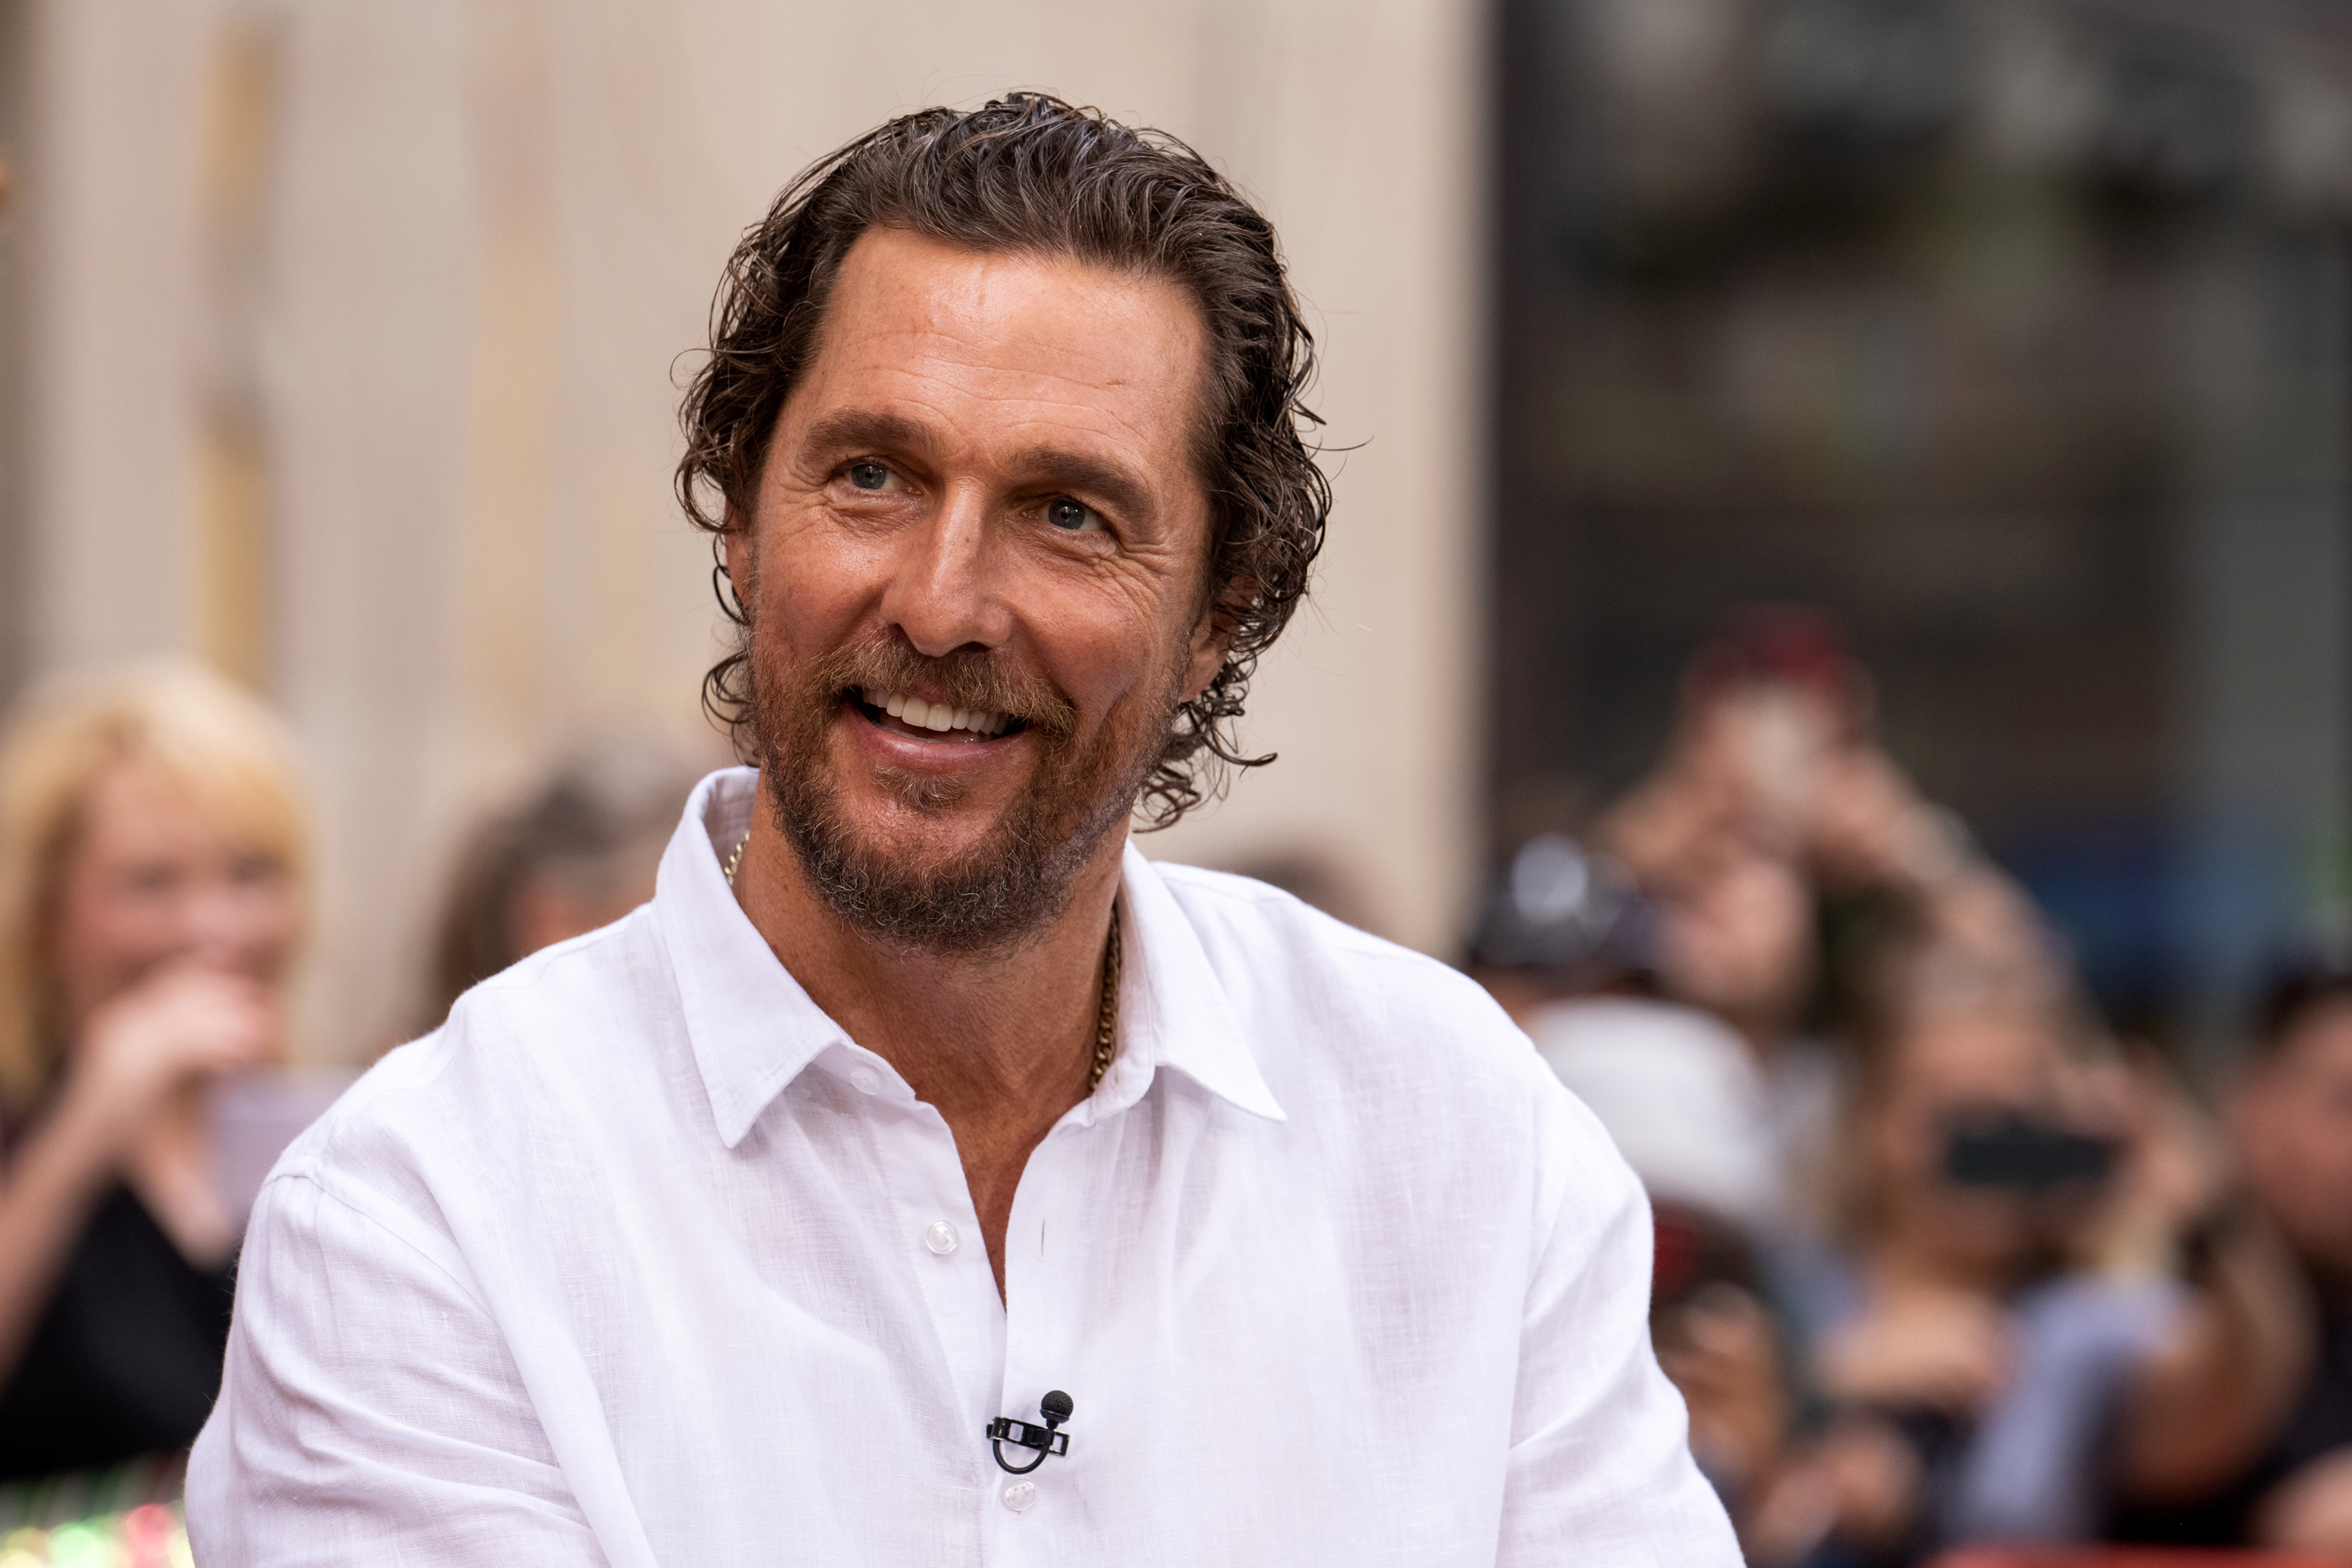 Matthew McConaughey in a shirt smiling during an interview